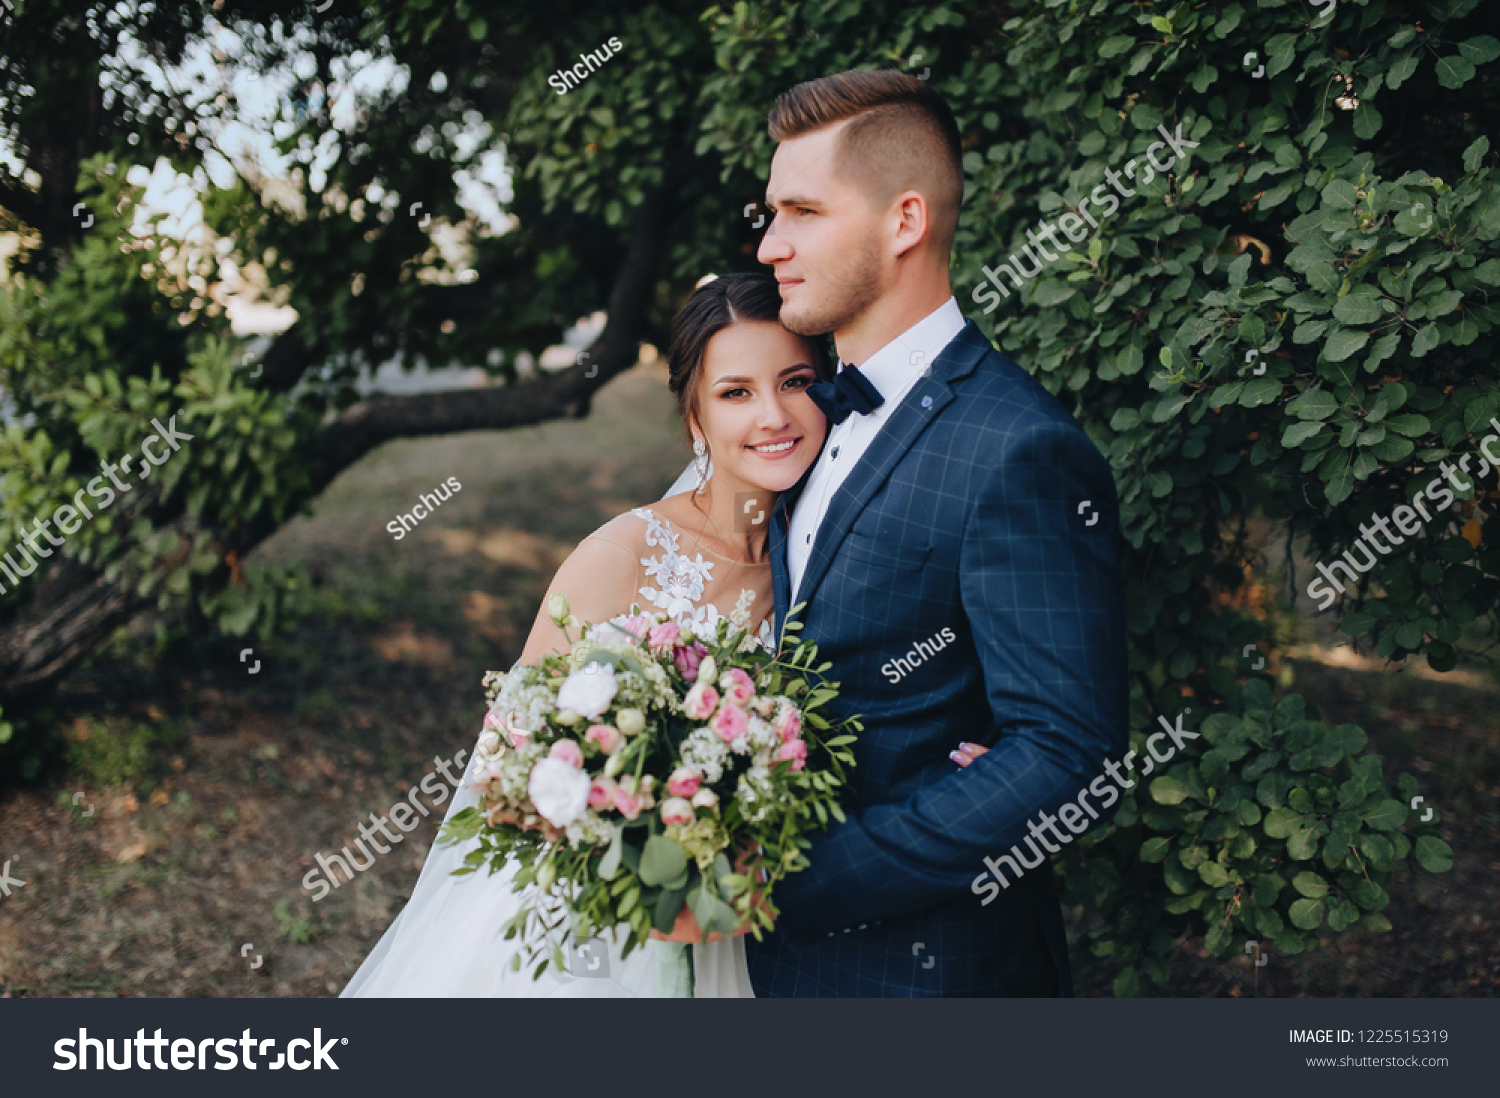 Beautiful newlyweds cuddle in a green garden with trees. Young bride and cute bride with a bouquet are standing in the park. Wedding photography. Stylish portrait. #1225515319